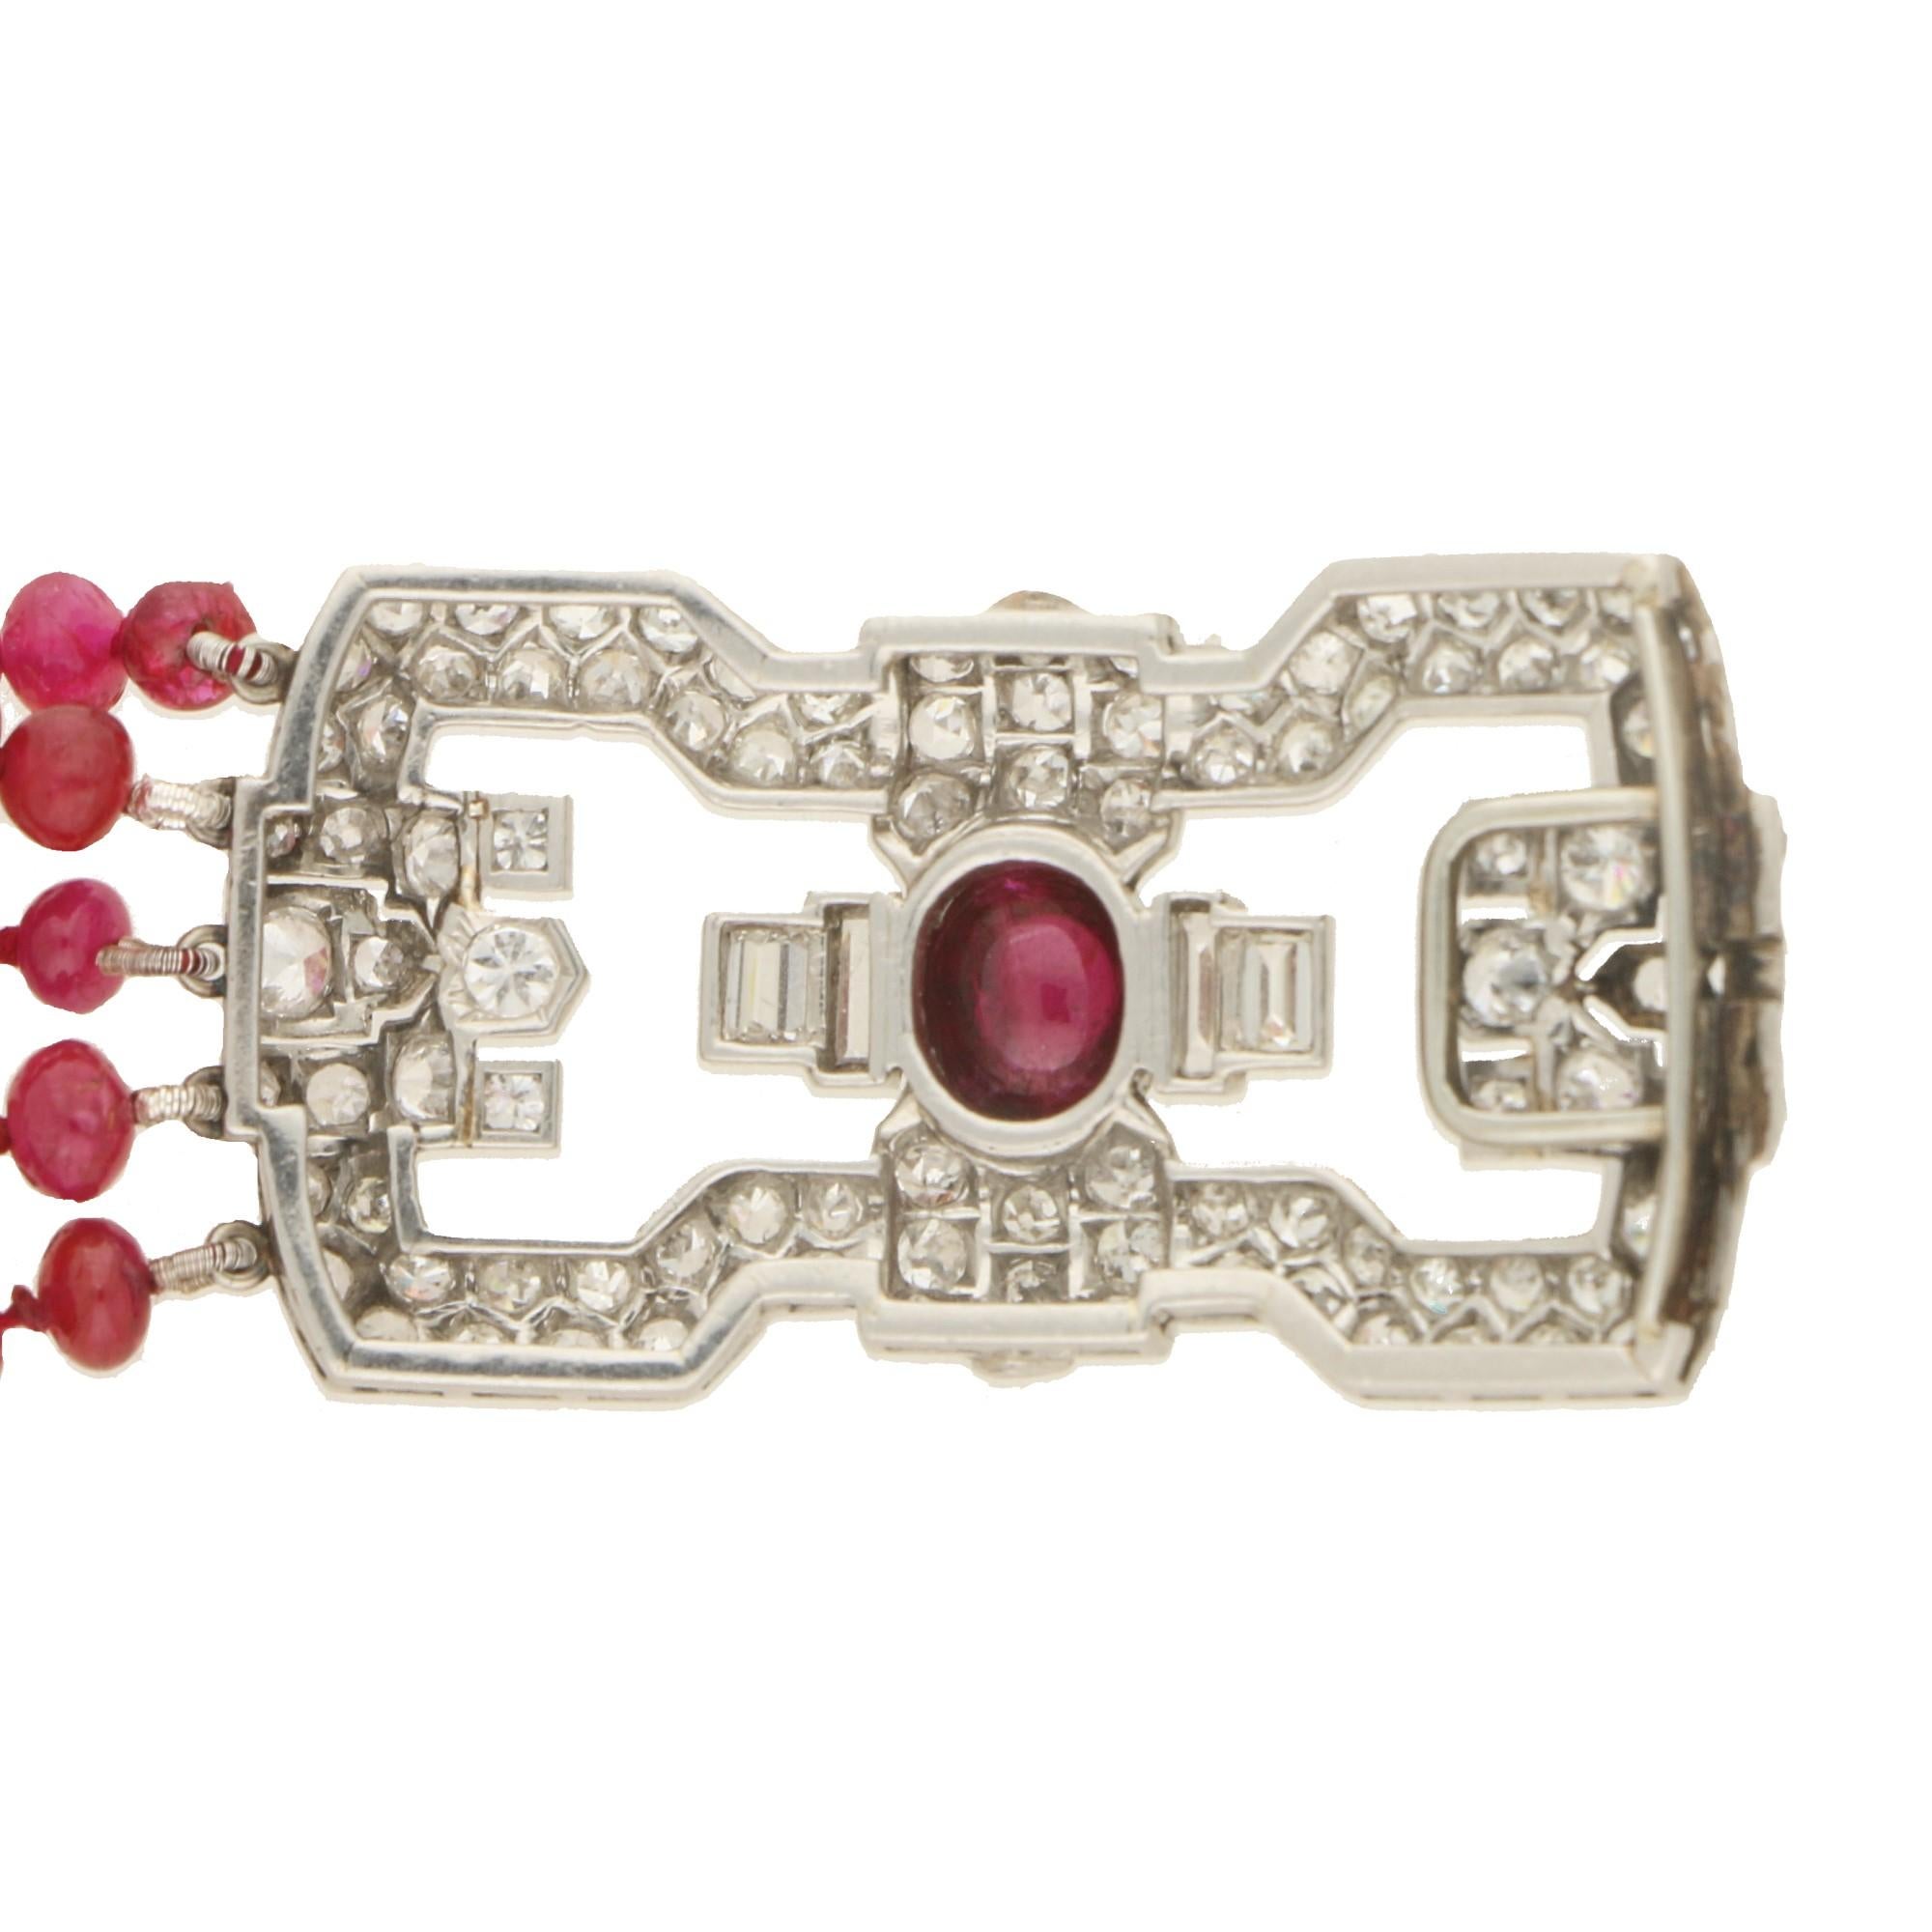 Cabochon Art Deco Ruby and Diamond Beaded Bracelet with a Platinum Clasp